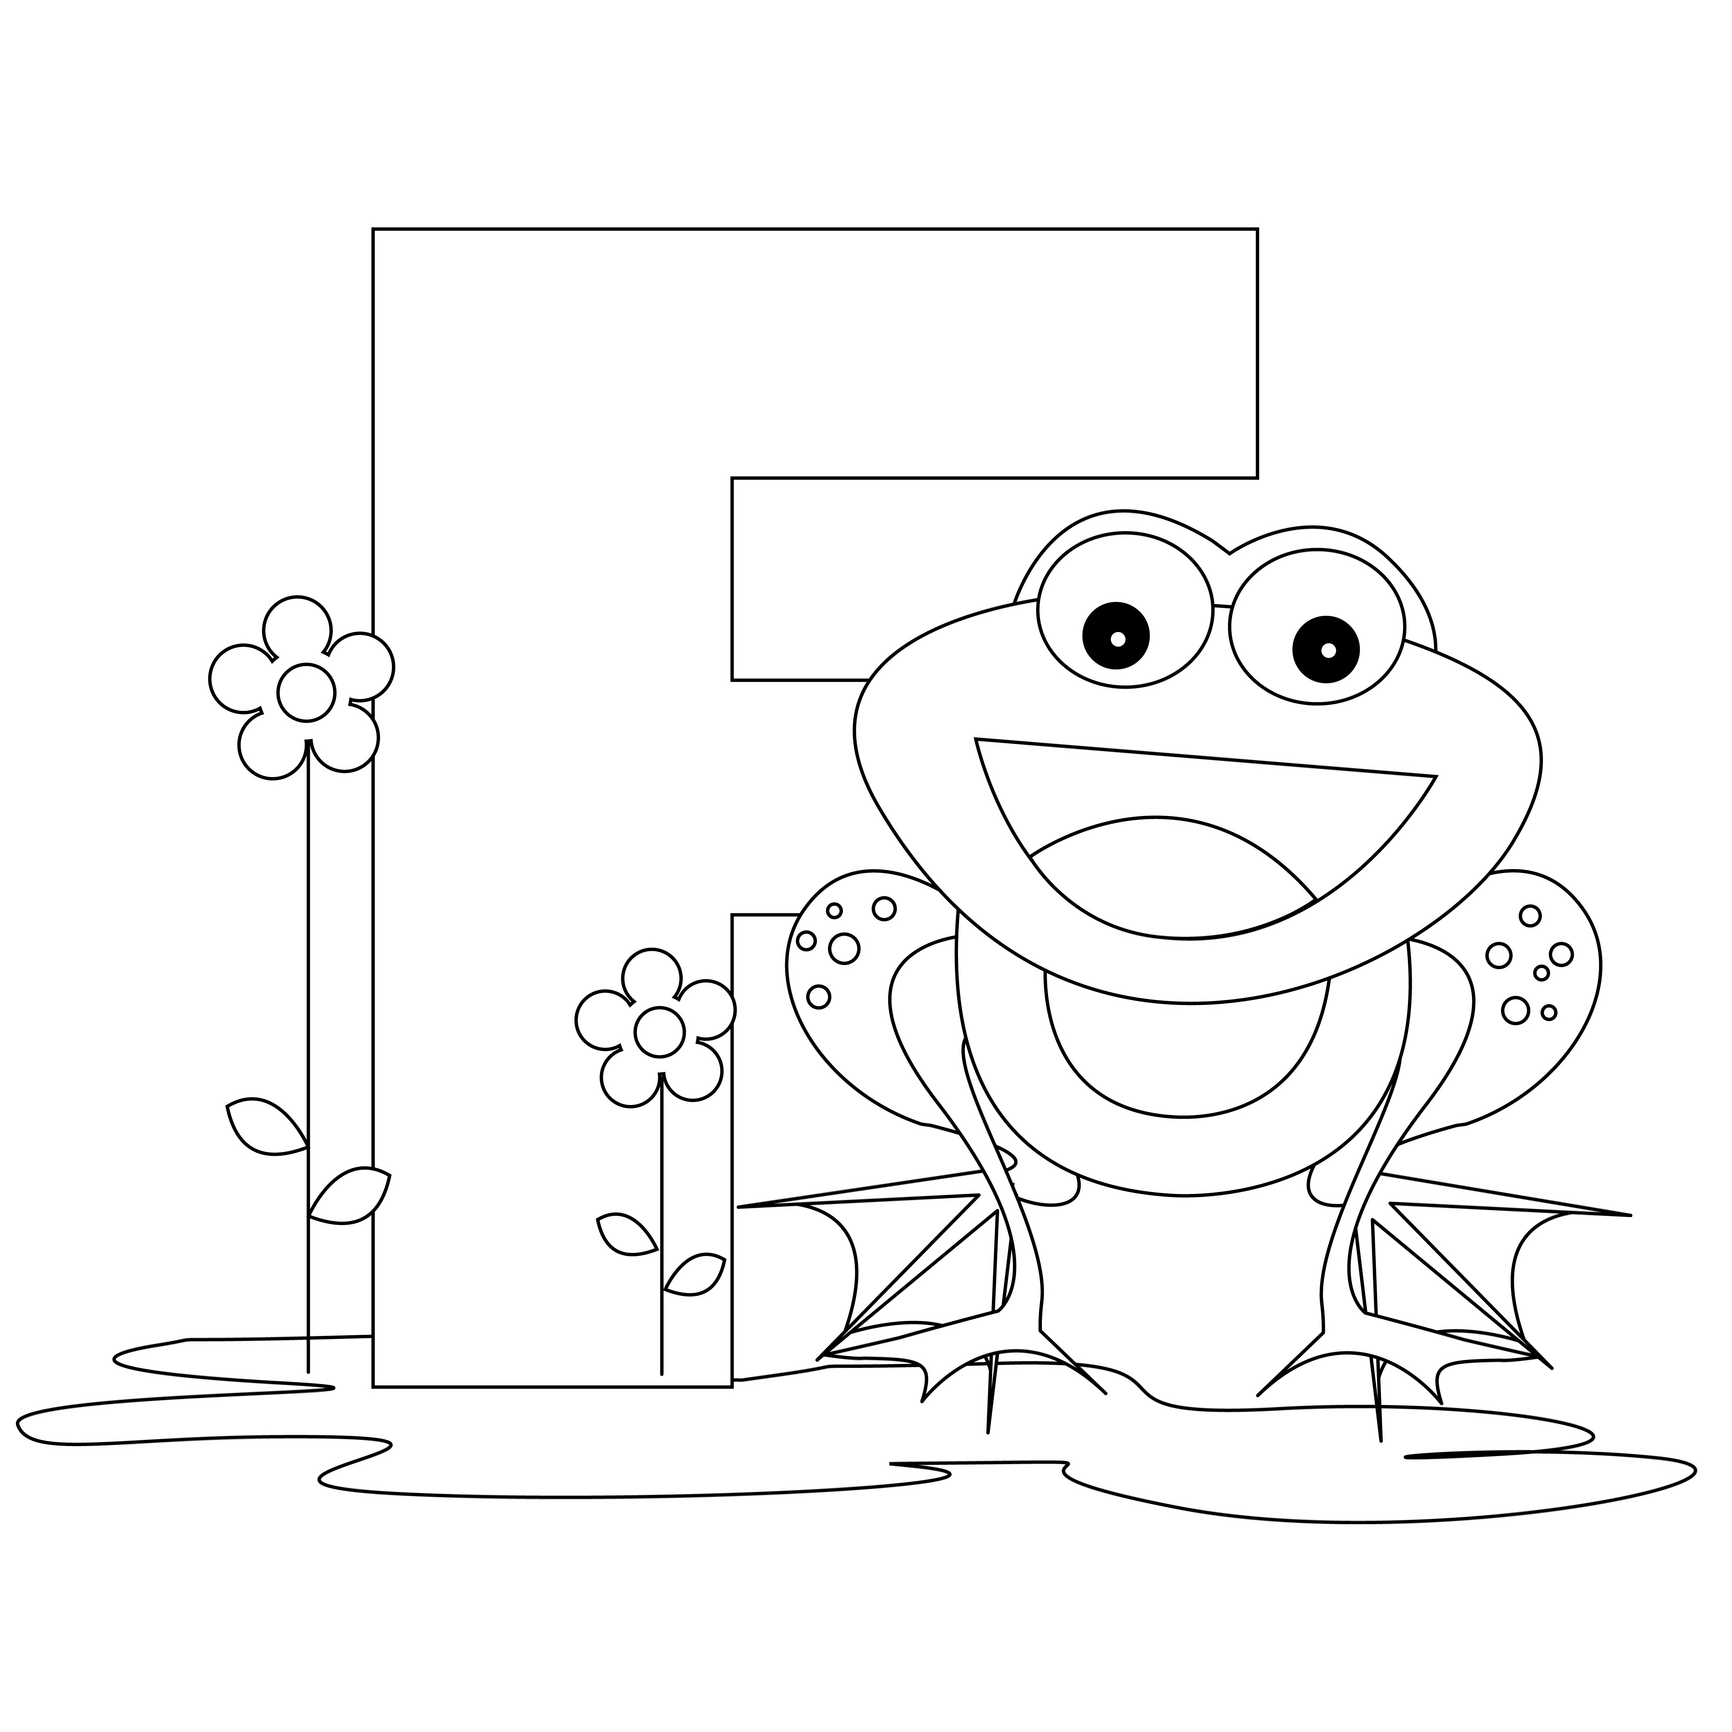 Frog coloring page